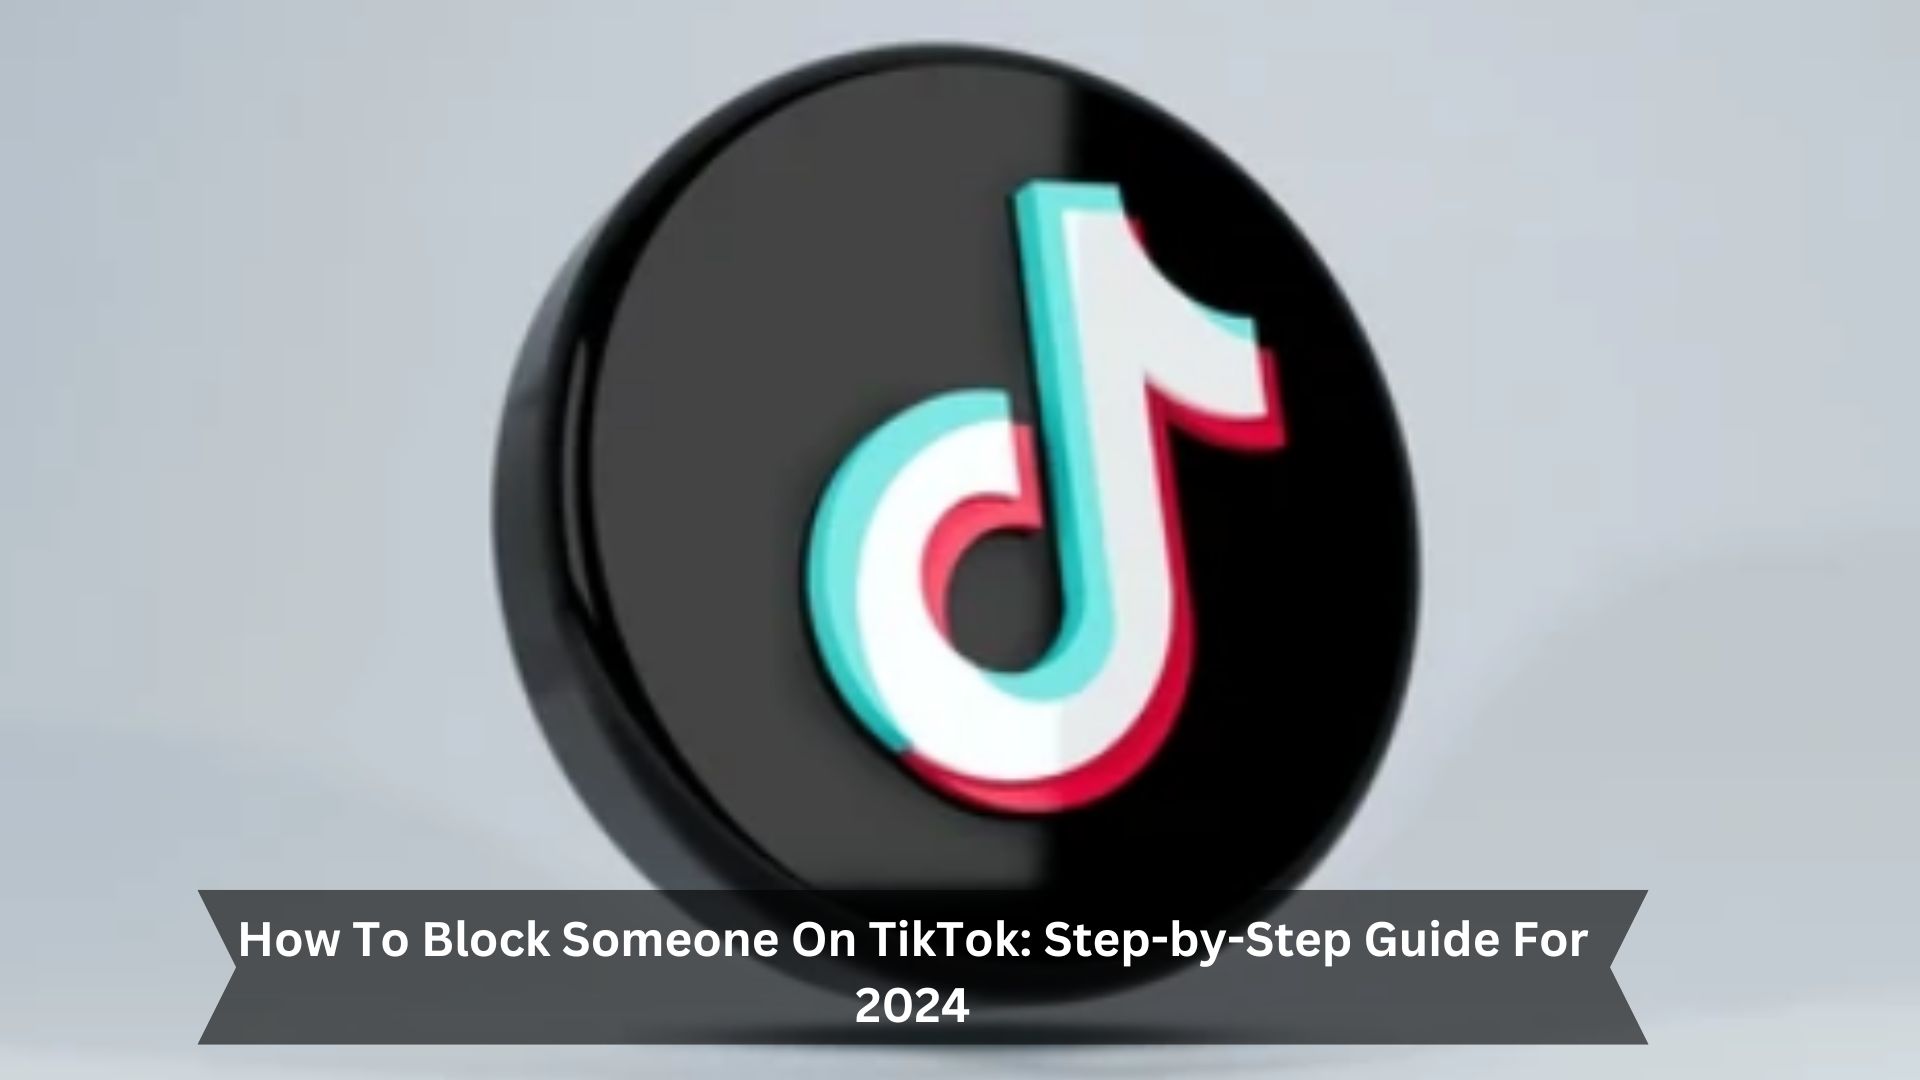 How-To-Block-Someone-On-TikTok-Step-by-Step-Guide-For-2024